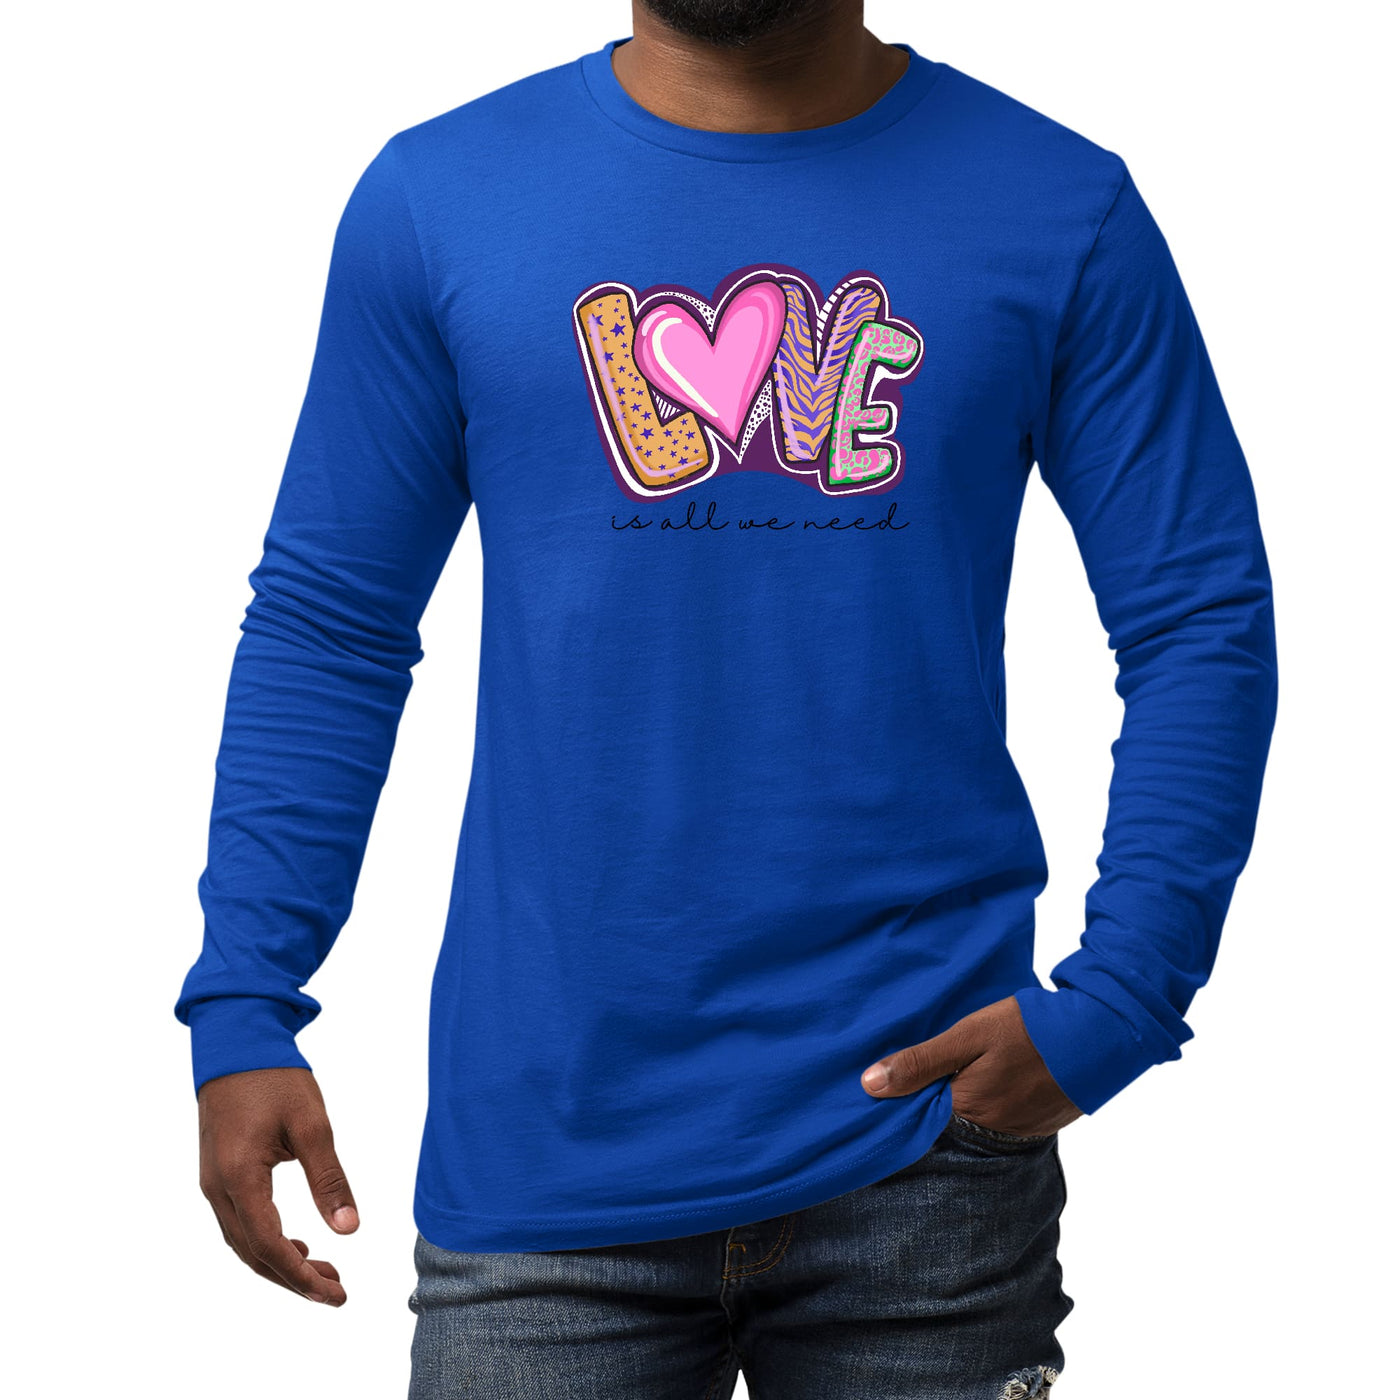 Mens Long Sleeve Graphic T-shirt - Say It Soul - Love Is All We Need - Unisex